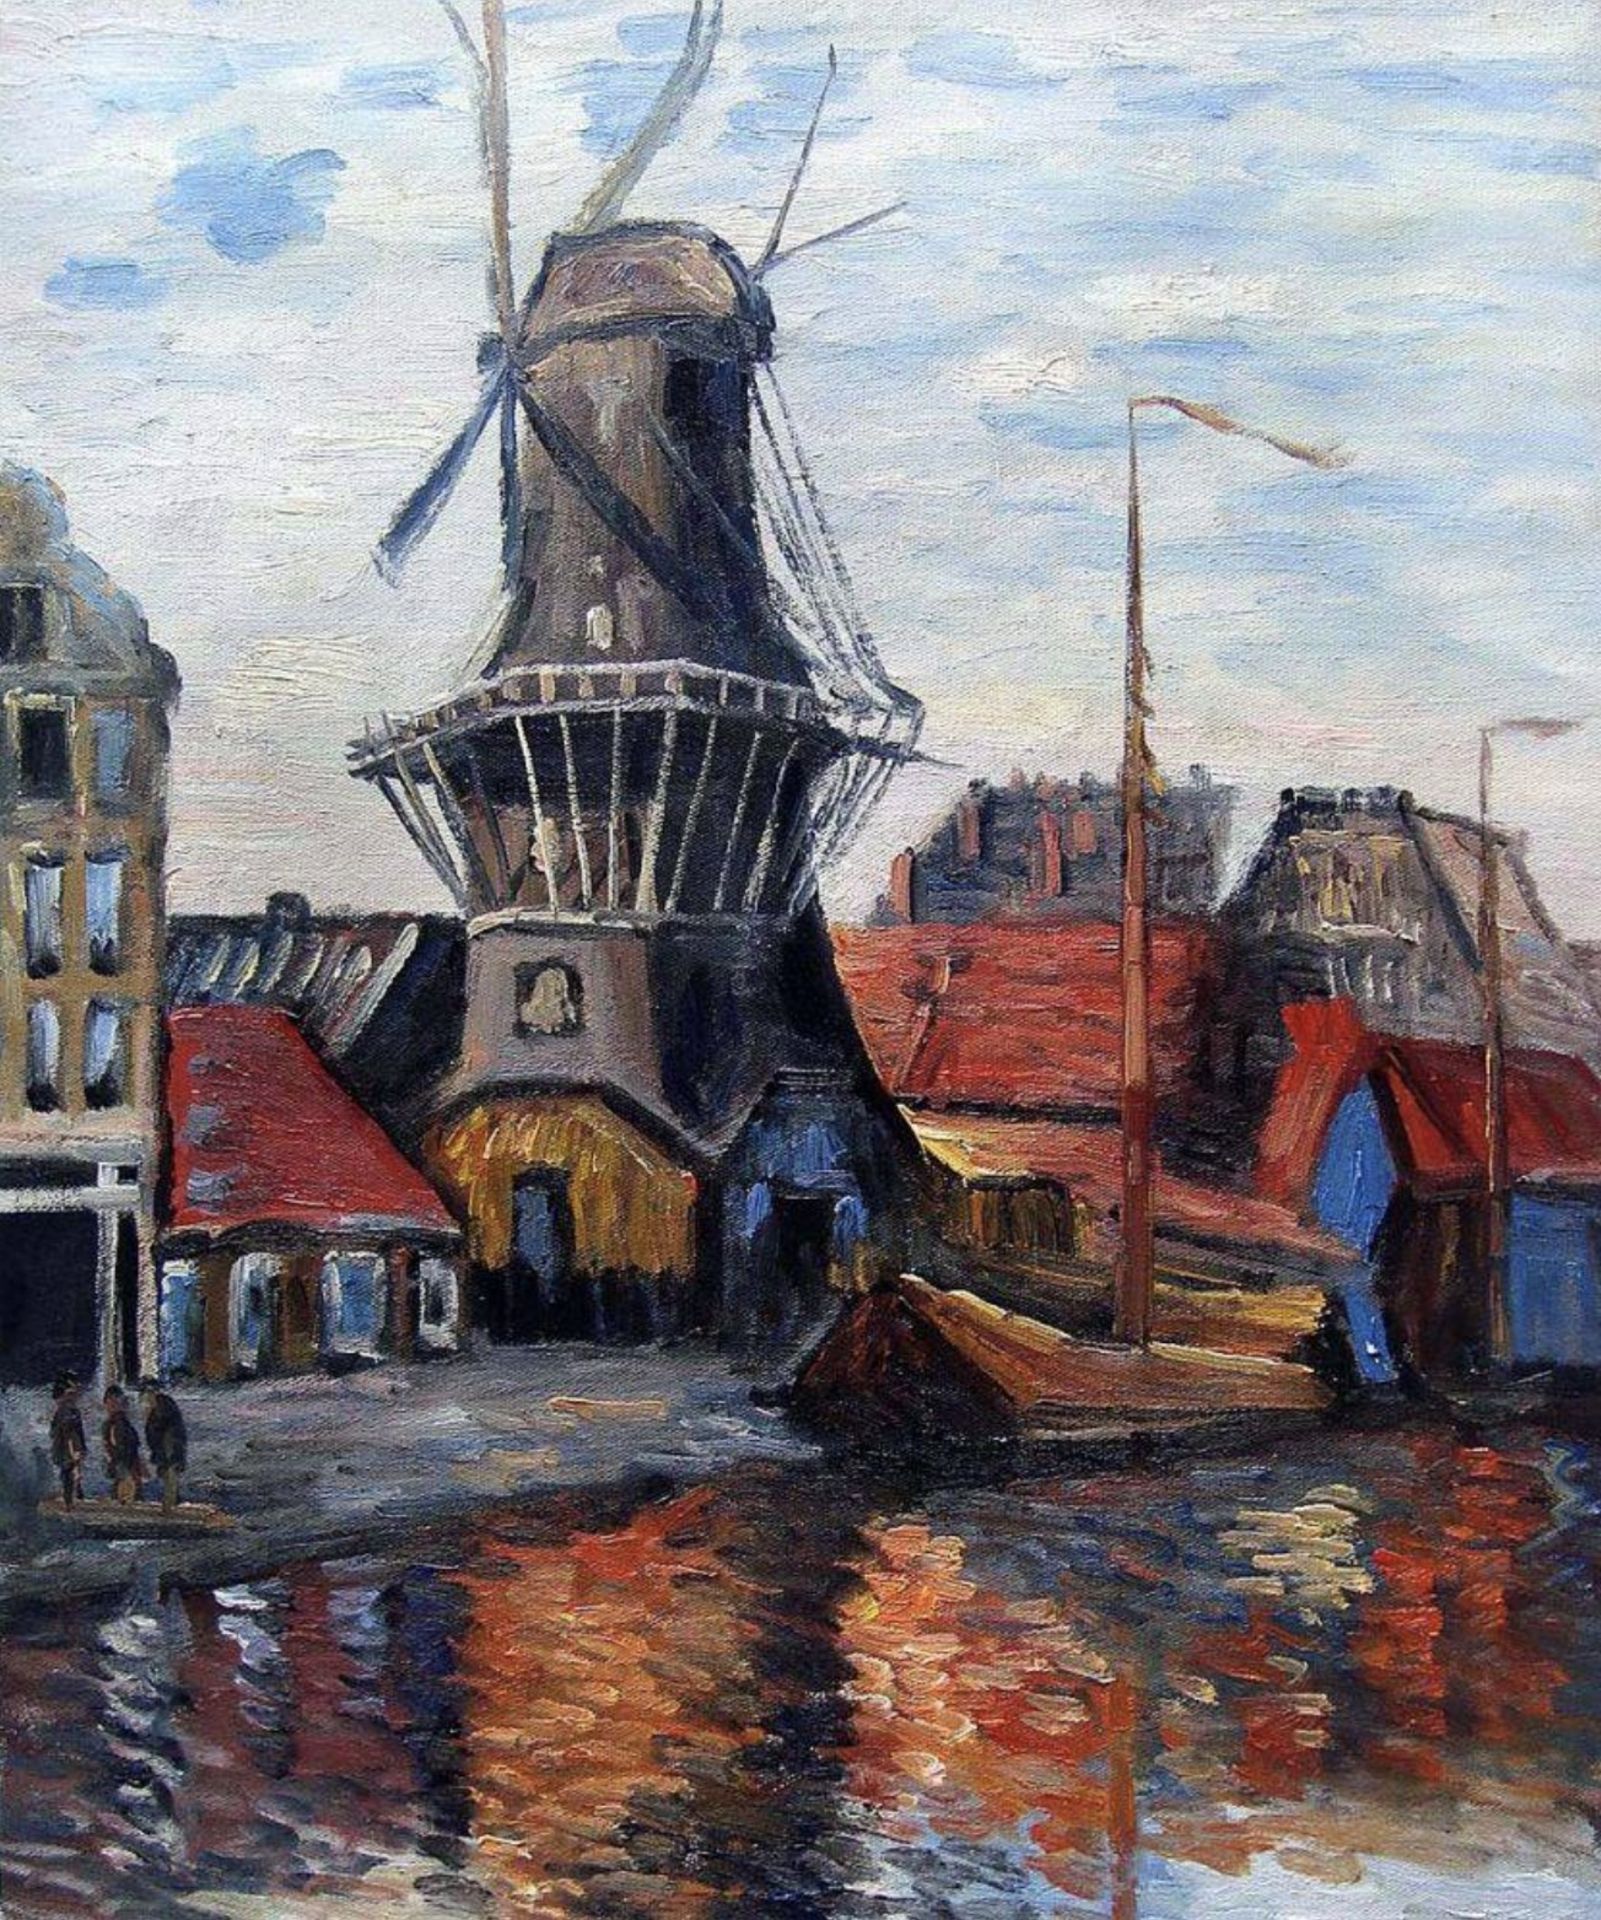 Claude Monet "Windmill, Onbekende, Canal, Amsterdam, 1874" Oil Painting